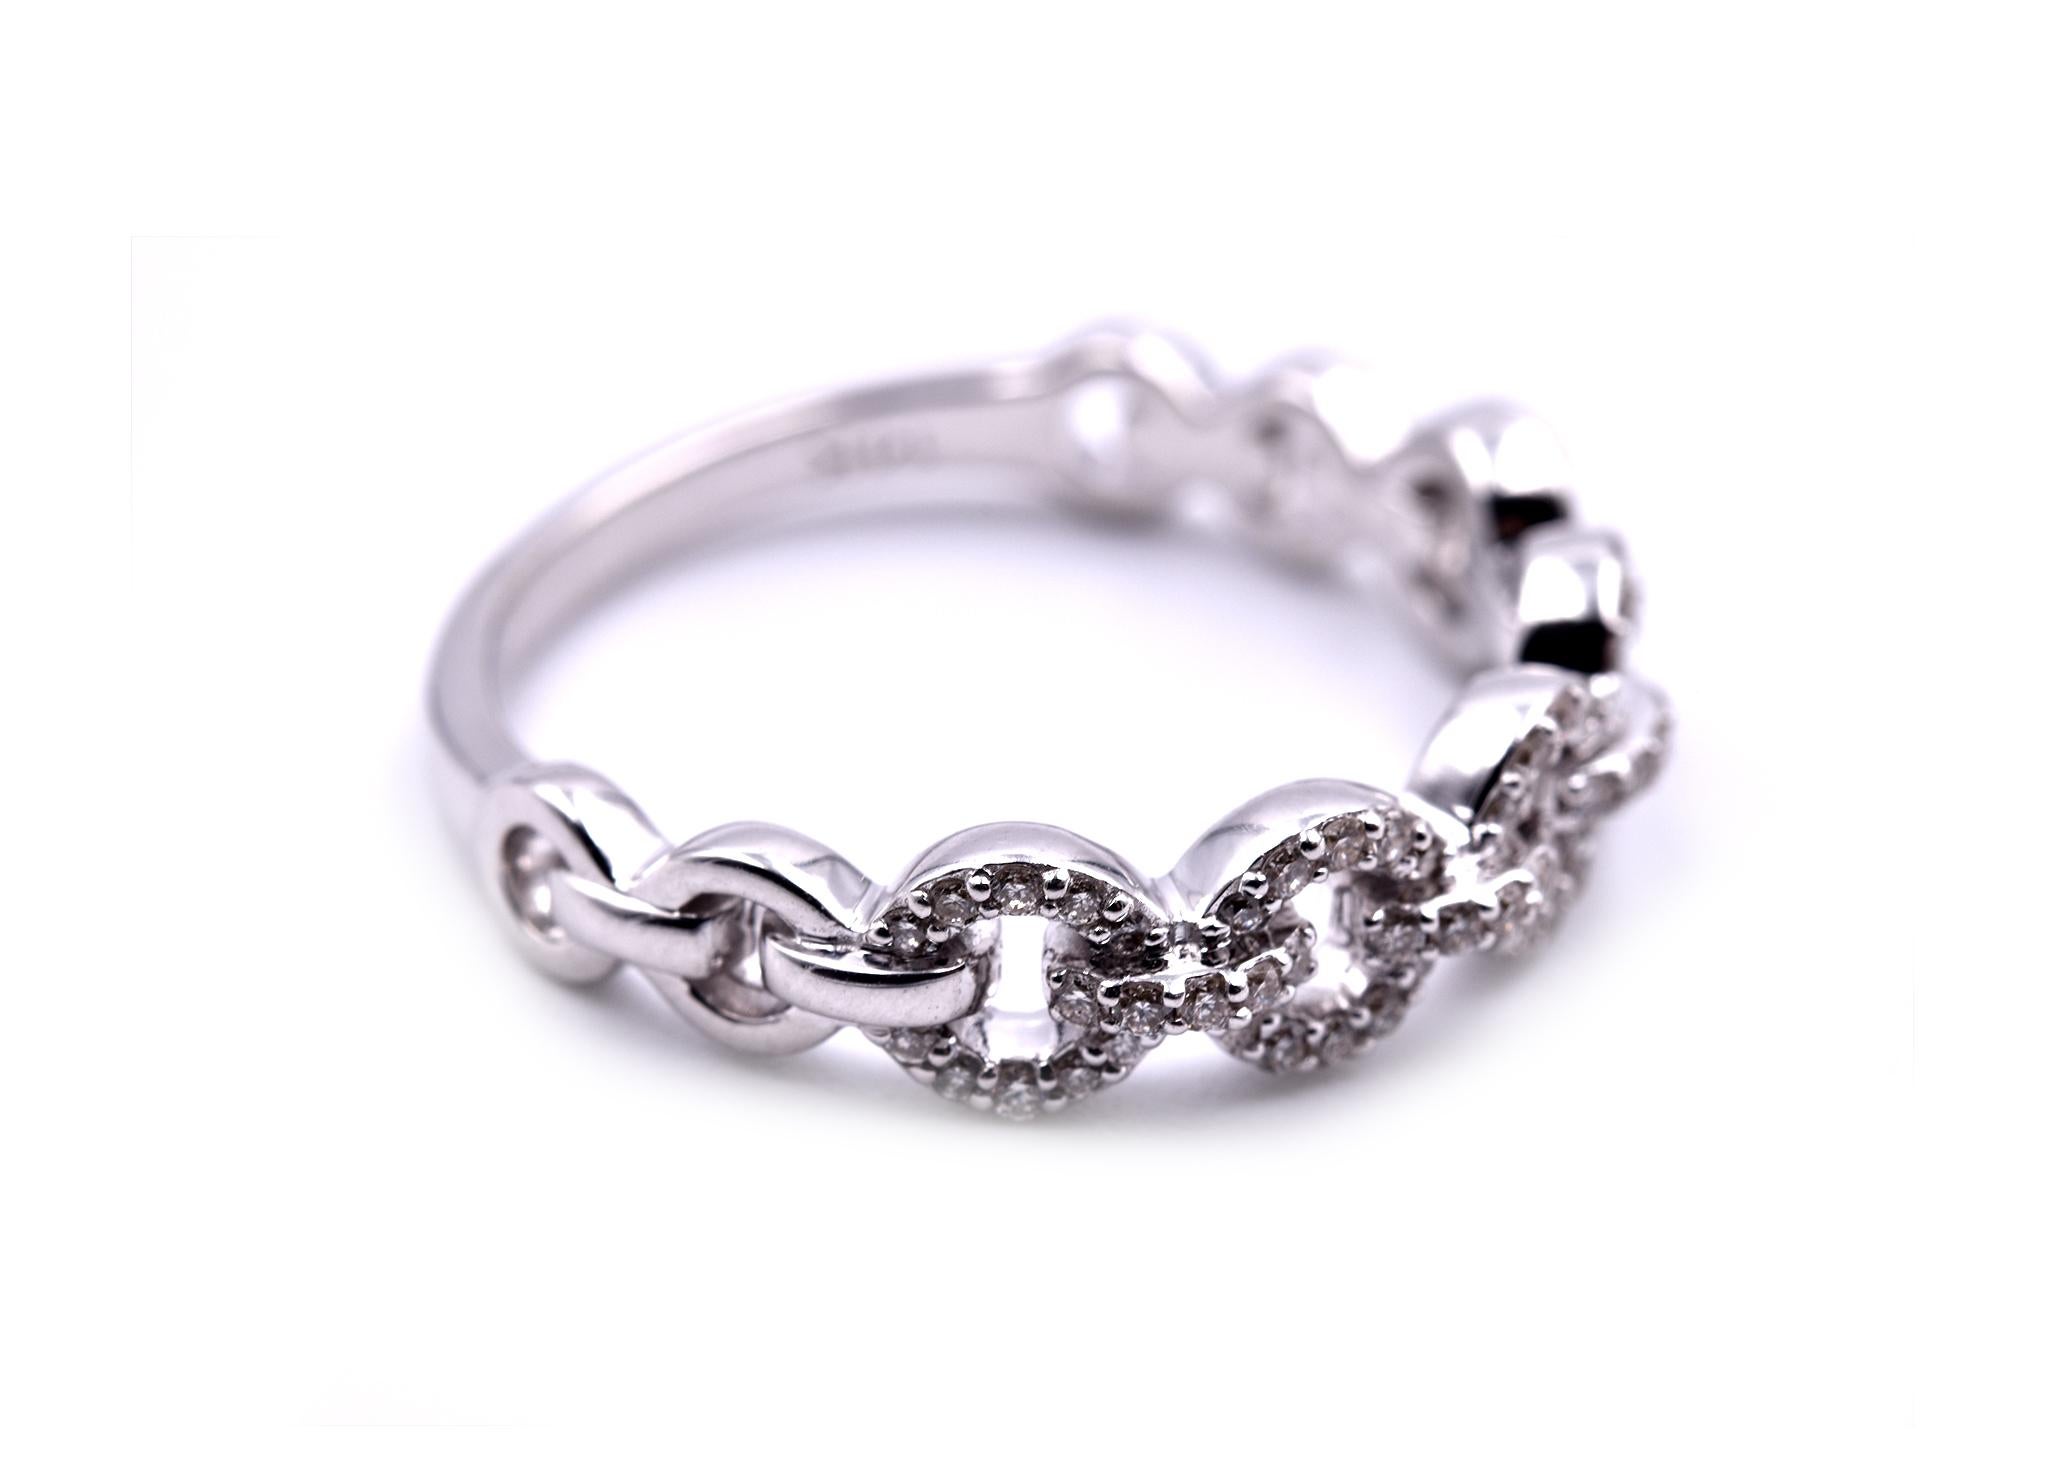 Circle Link Band

Designer: custom design
Material: 14k white gold
Diamonds: 70 round brilliant cut = .25cttw
Color: G
Clarity: VS
Ring size: 7 ¼ (please allow two additional shipping days for sizing requests)
Weight: 3.0 grams 
